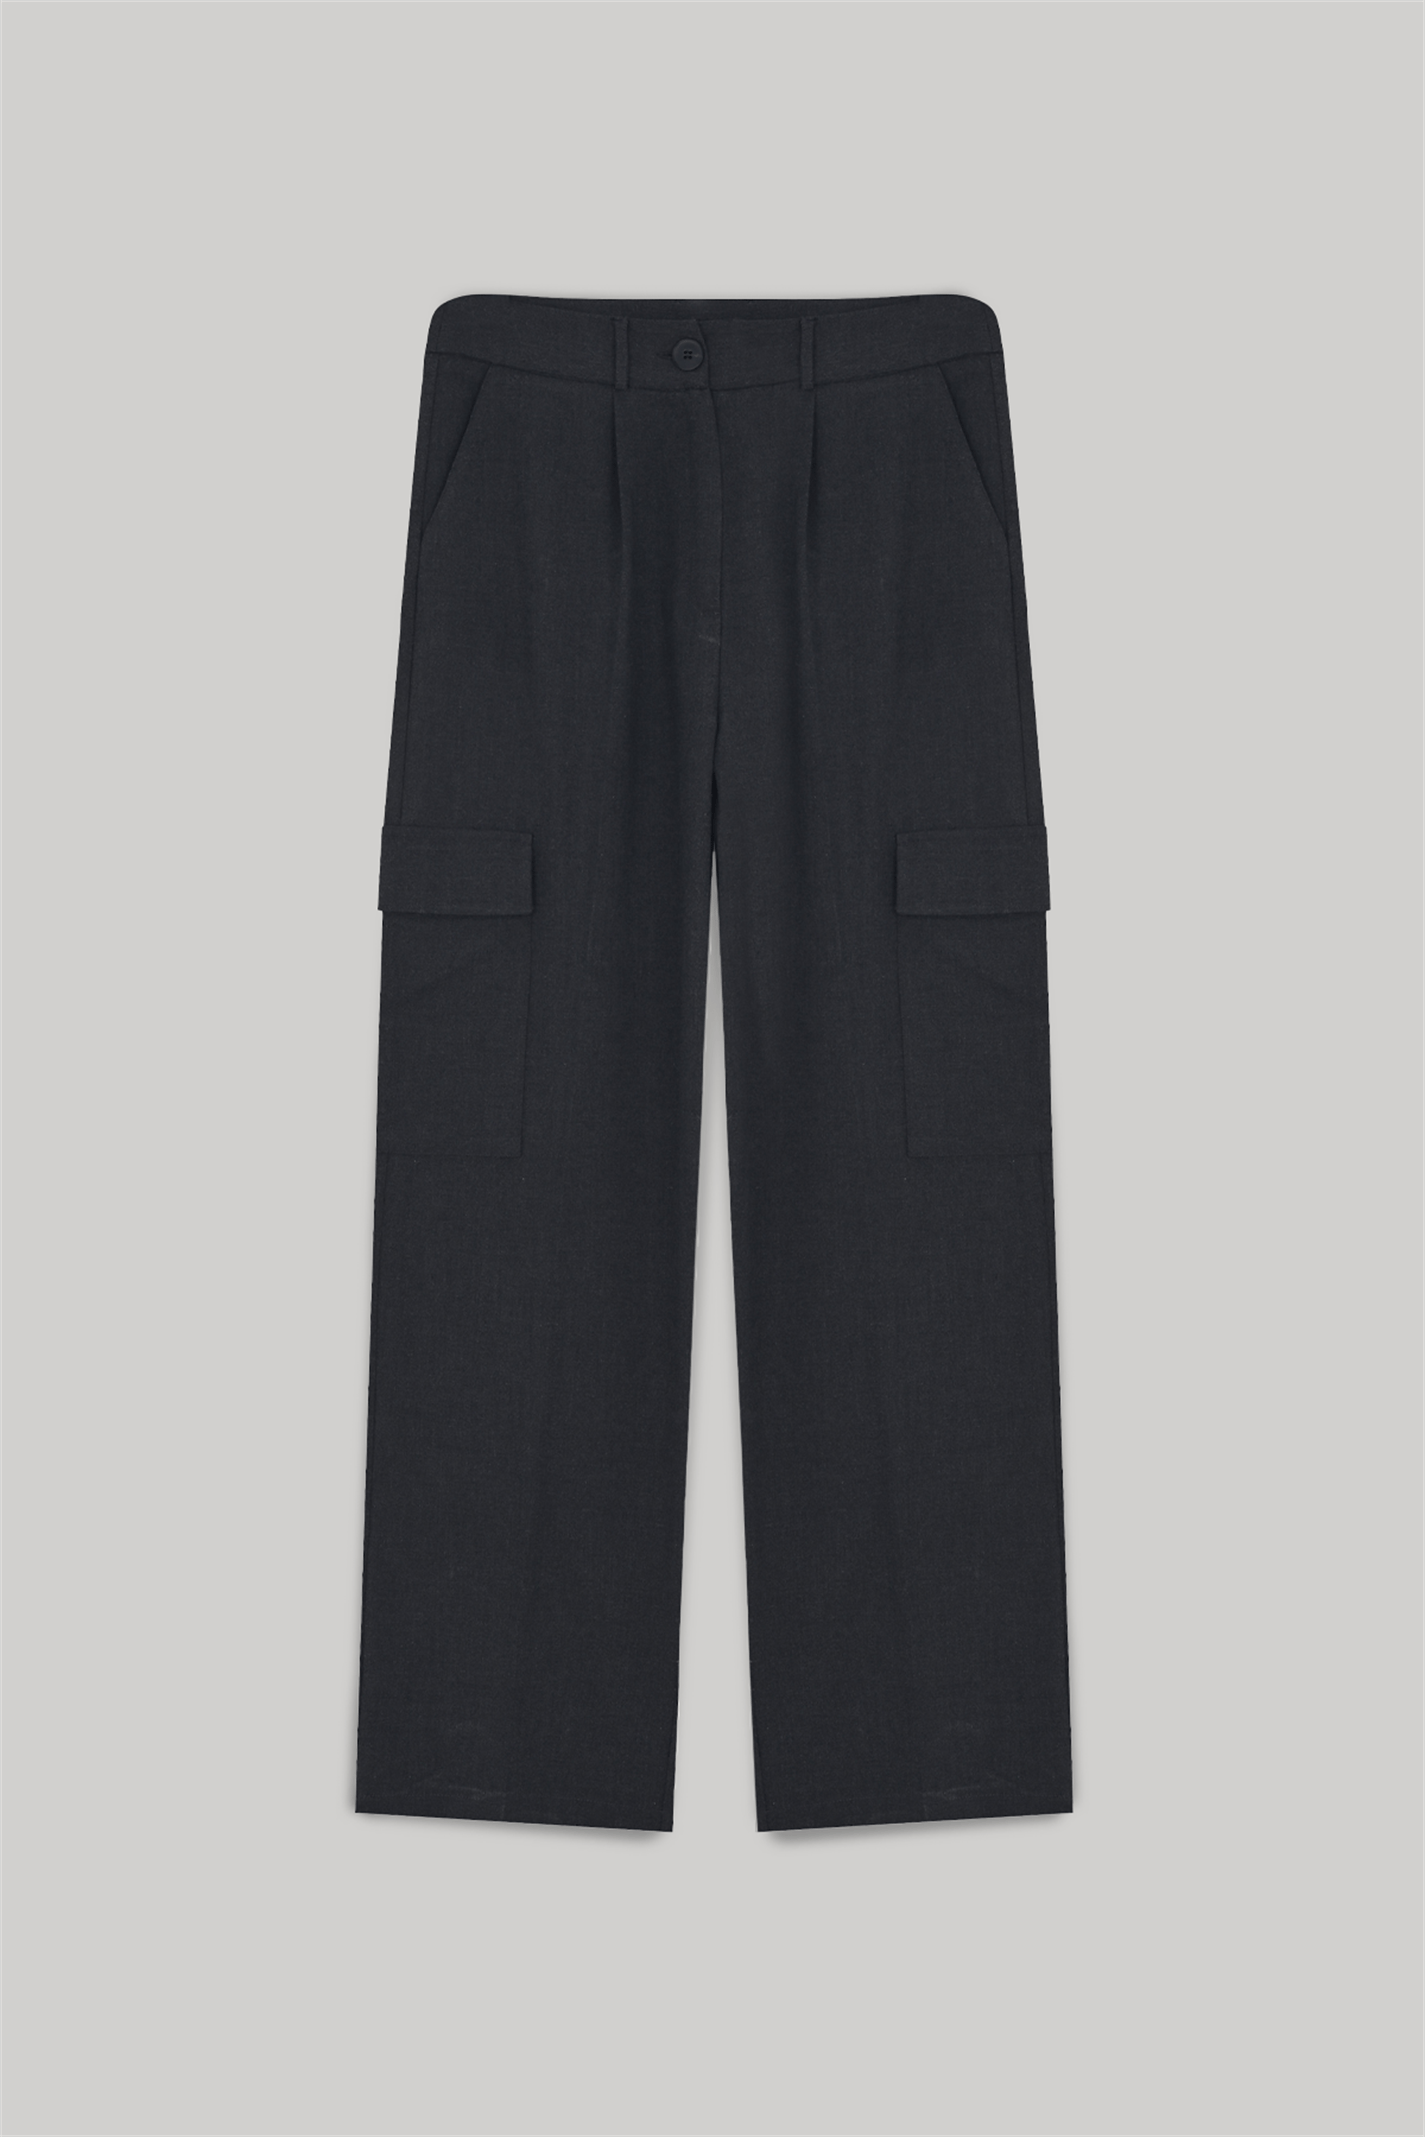 Anthracite Cargo Pocket Boyfriend Pants | Suud Collection